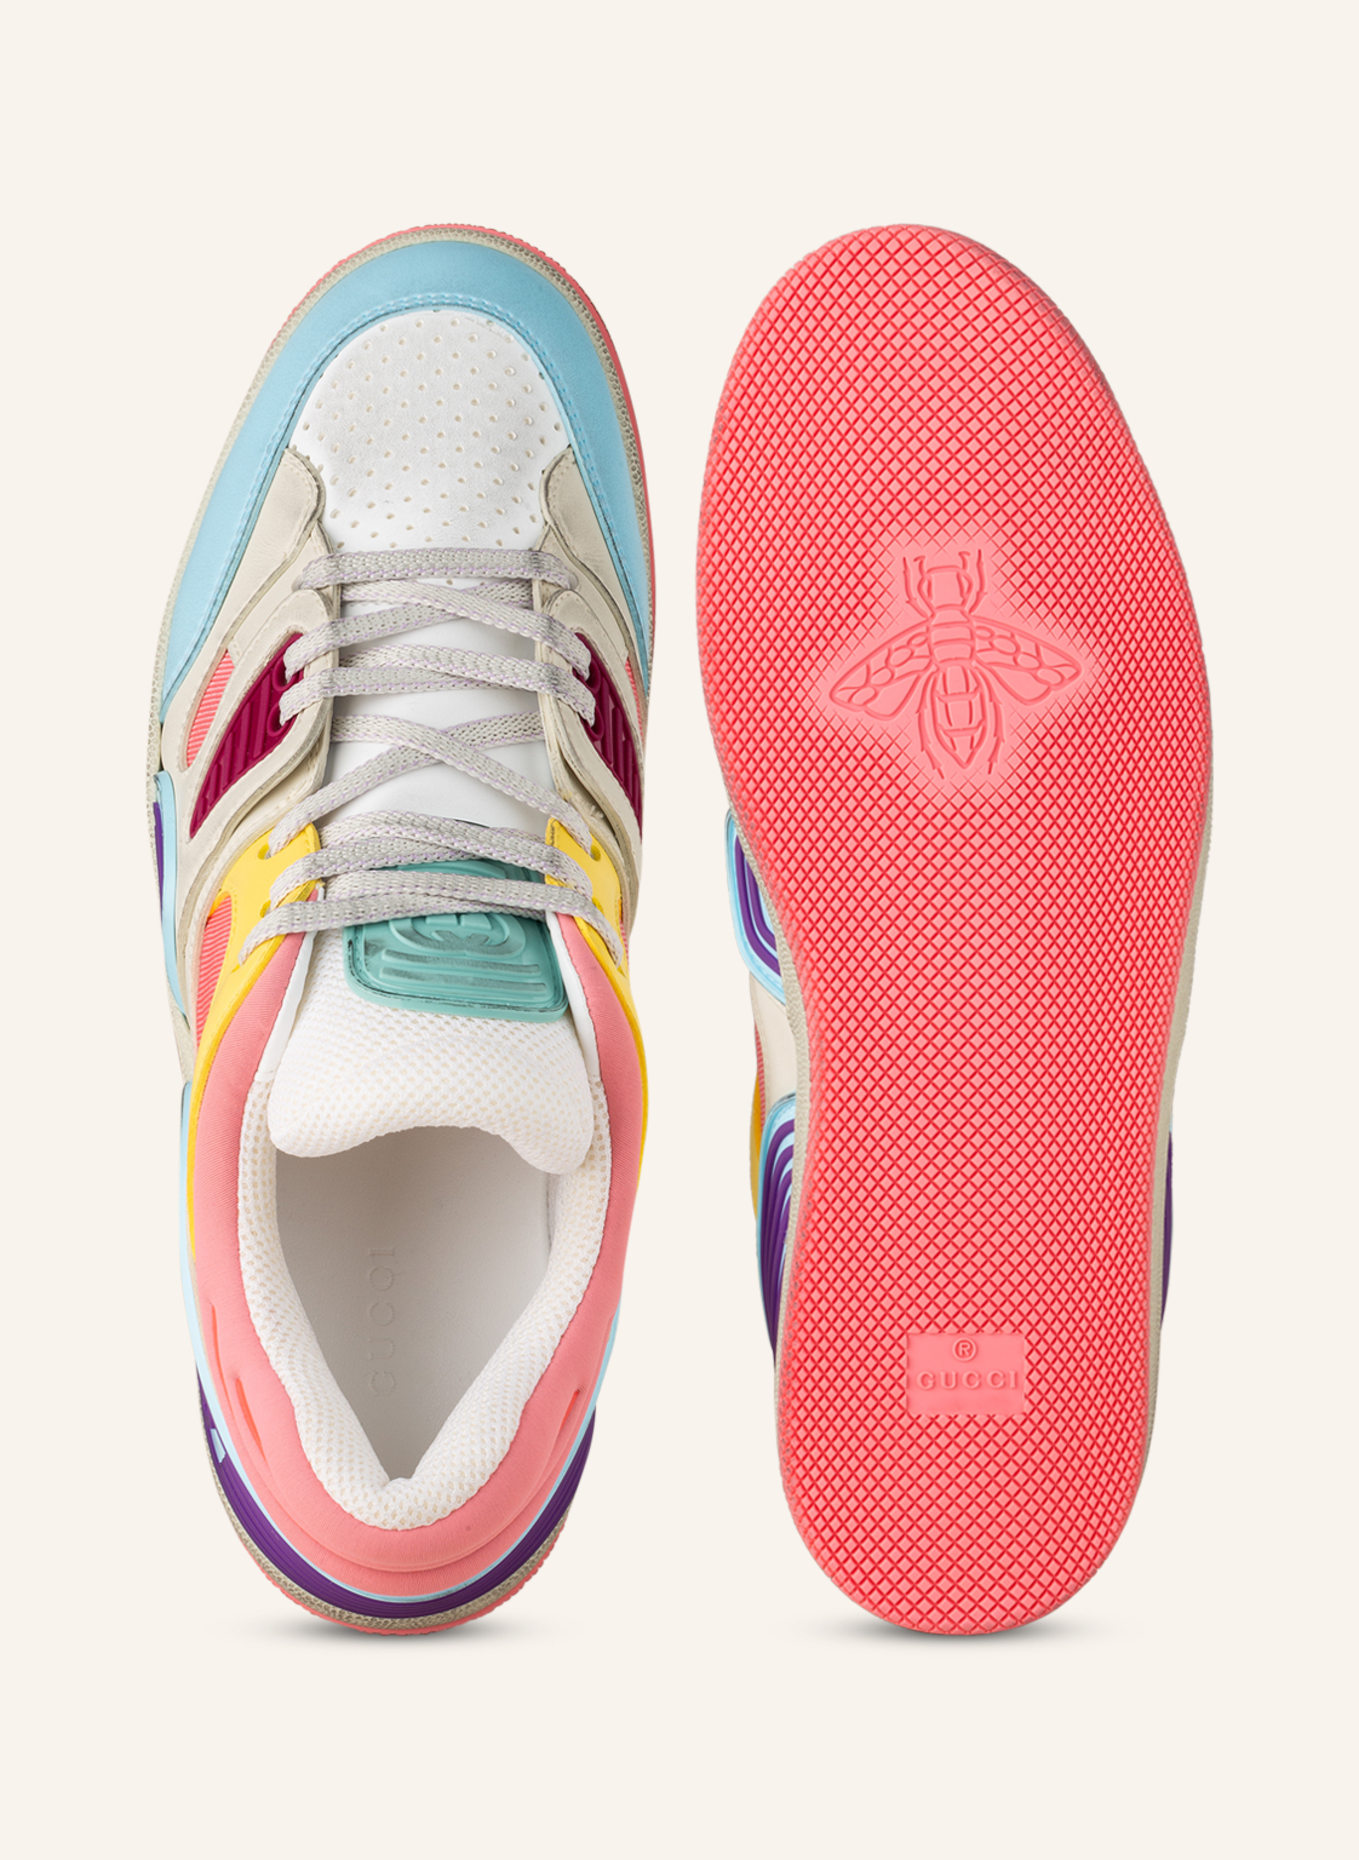 WMNS) Gucci Ace sneaker with Web 'Pink' 760774-FACRF-5856 - KICKS CREW